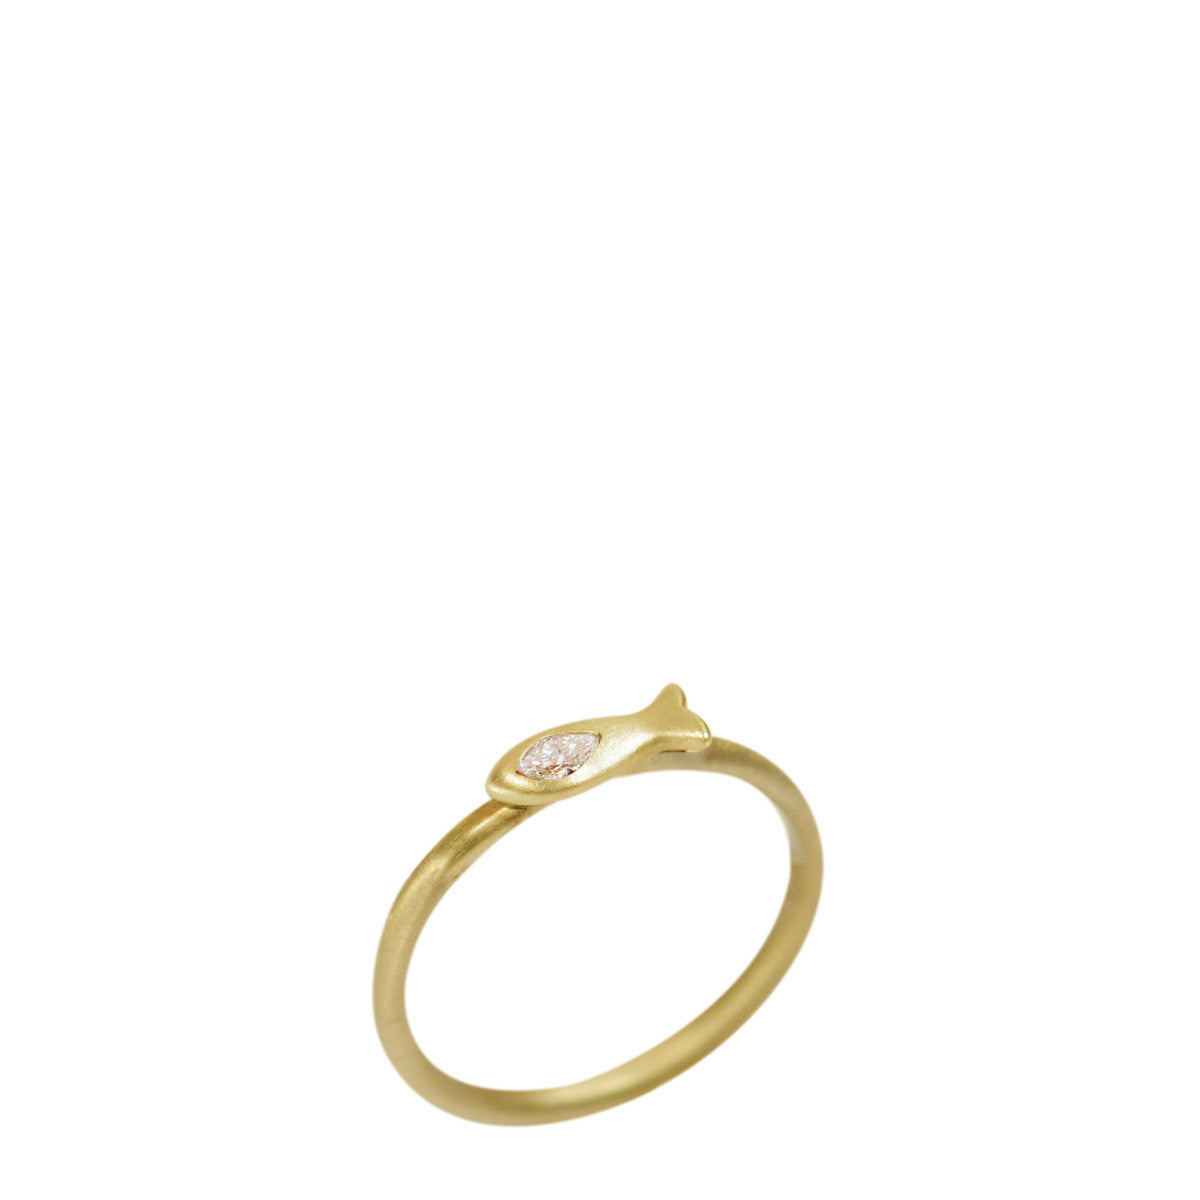 Alliance ring with a 0.32 carat diamonds in yellow gold - BAUNAT